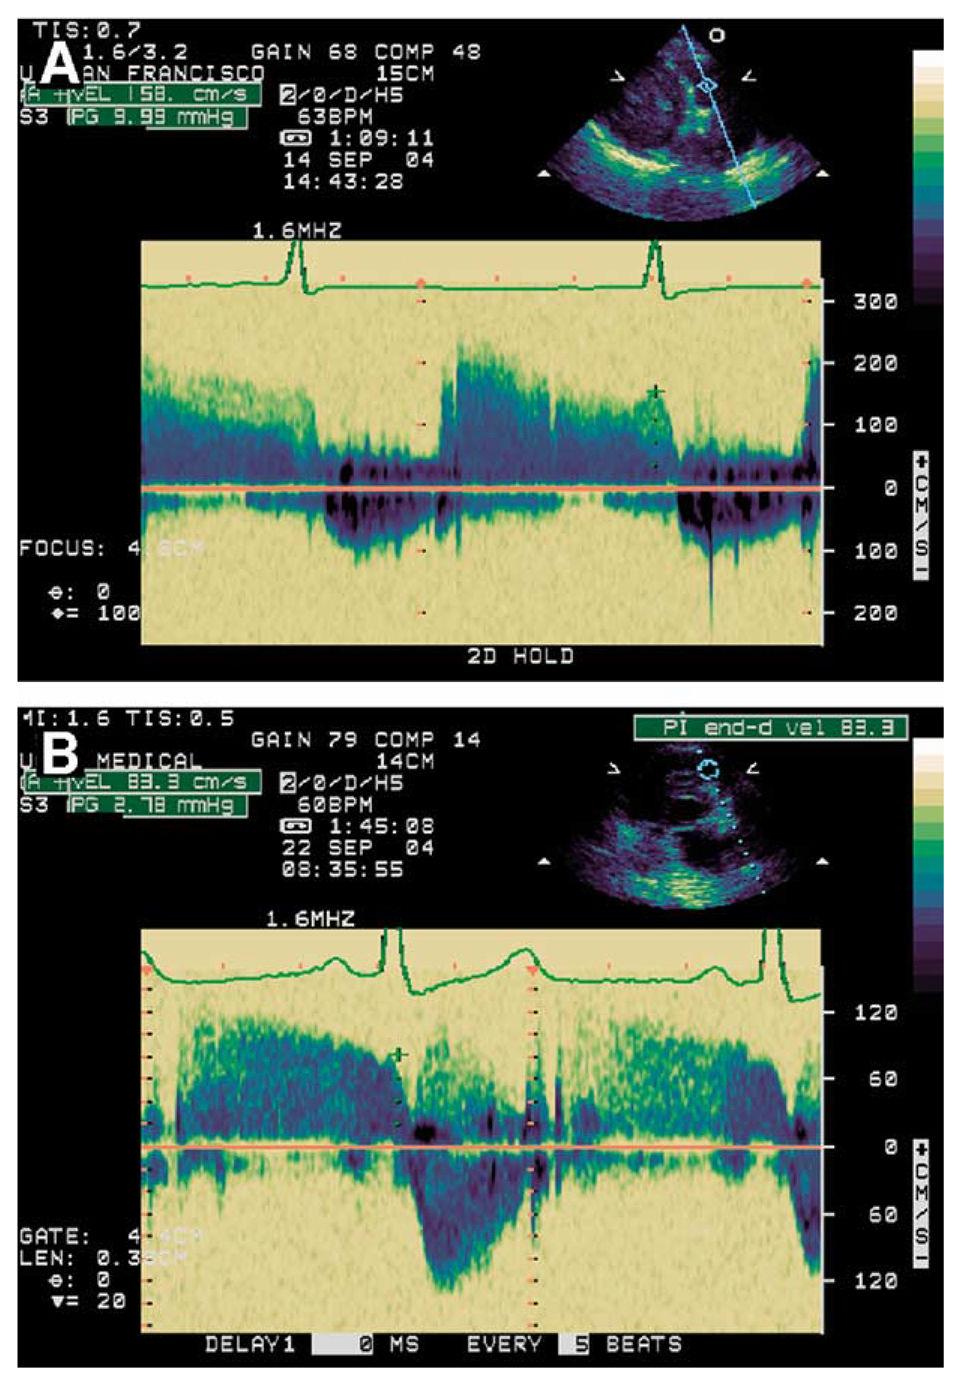 Ristow et al. Page 9 Figure 2. Case illustrates elevated end-diastolic pulmonary regurgitation (EDPR) gradient of 10 mm Hg before treatment for heart failure (A) and improvement 2 weeks later to 2.